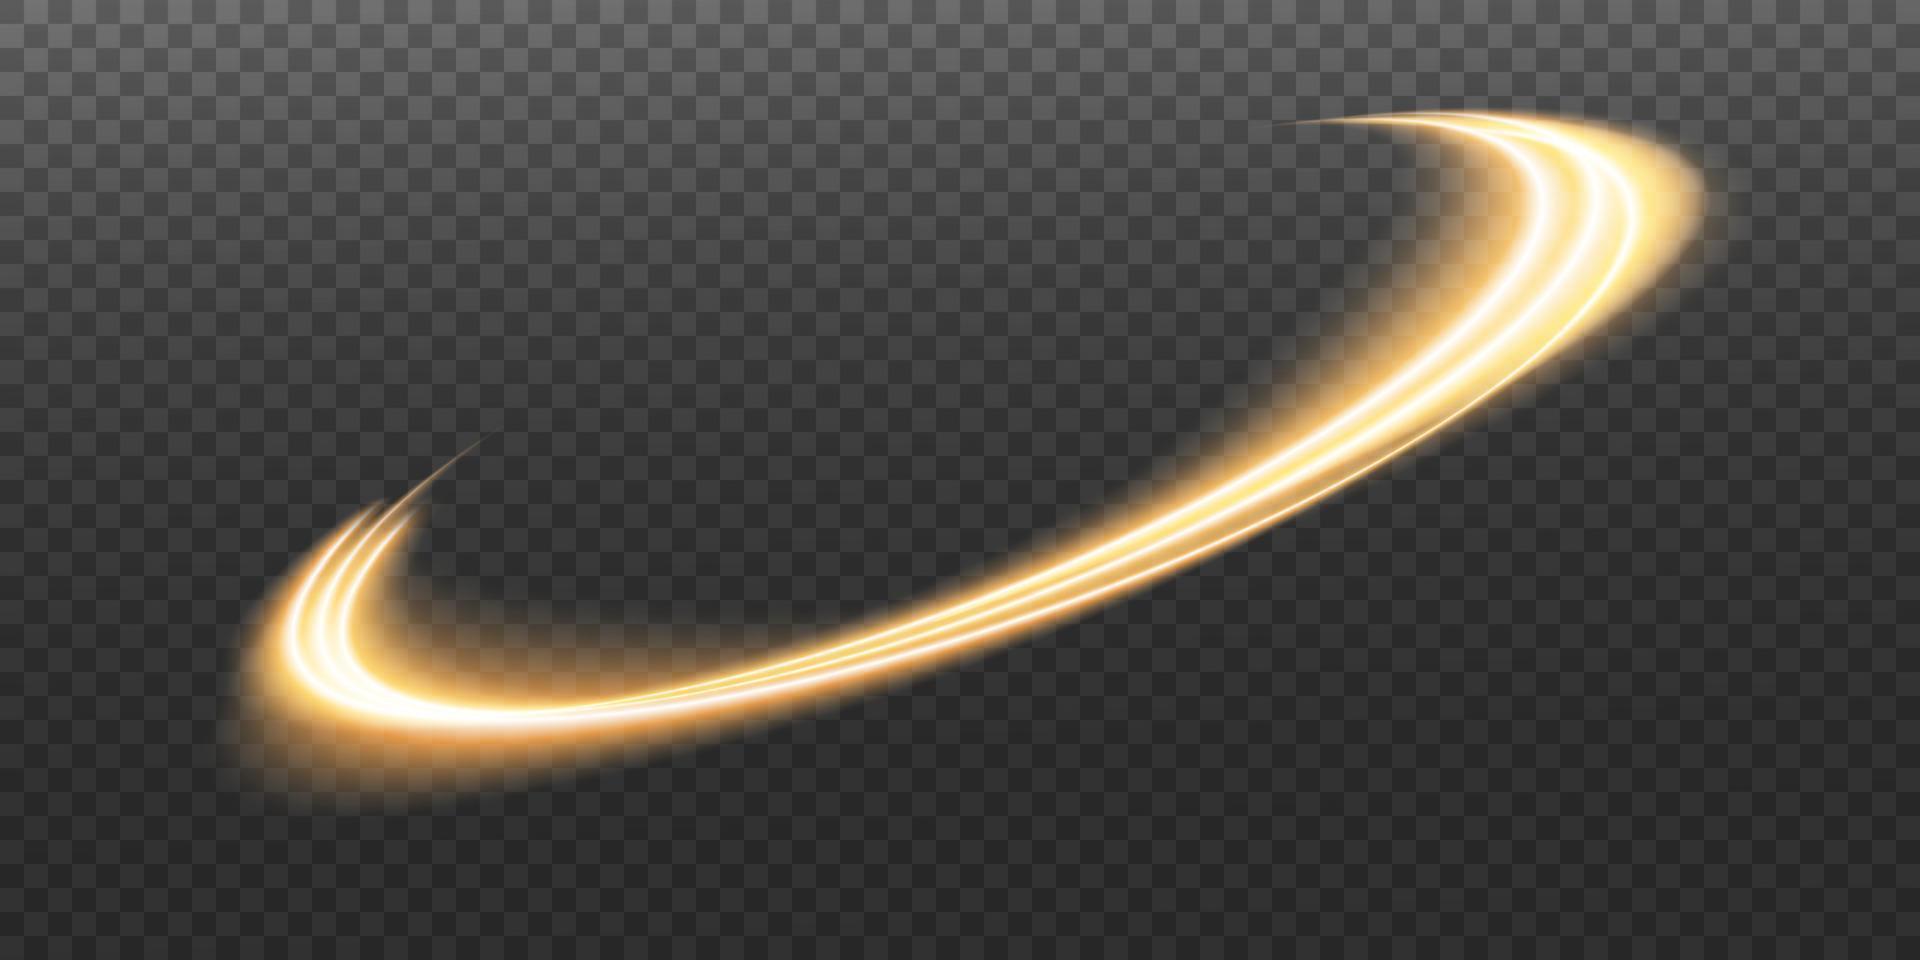 Luminous gold lines of speed. Light glowing effect. Abstract motion lines. Light trail wave, fire path trace line, car lights, optic fiber and incandescence curve twirl vector